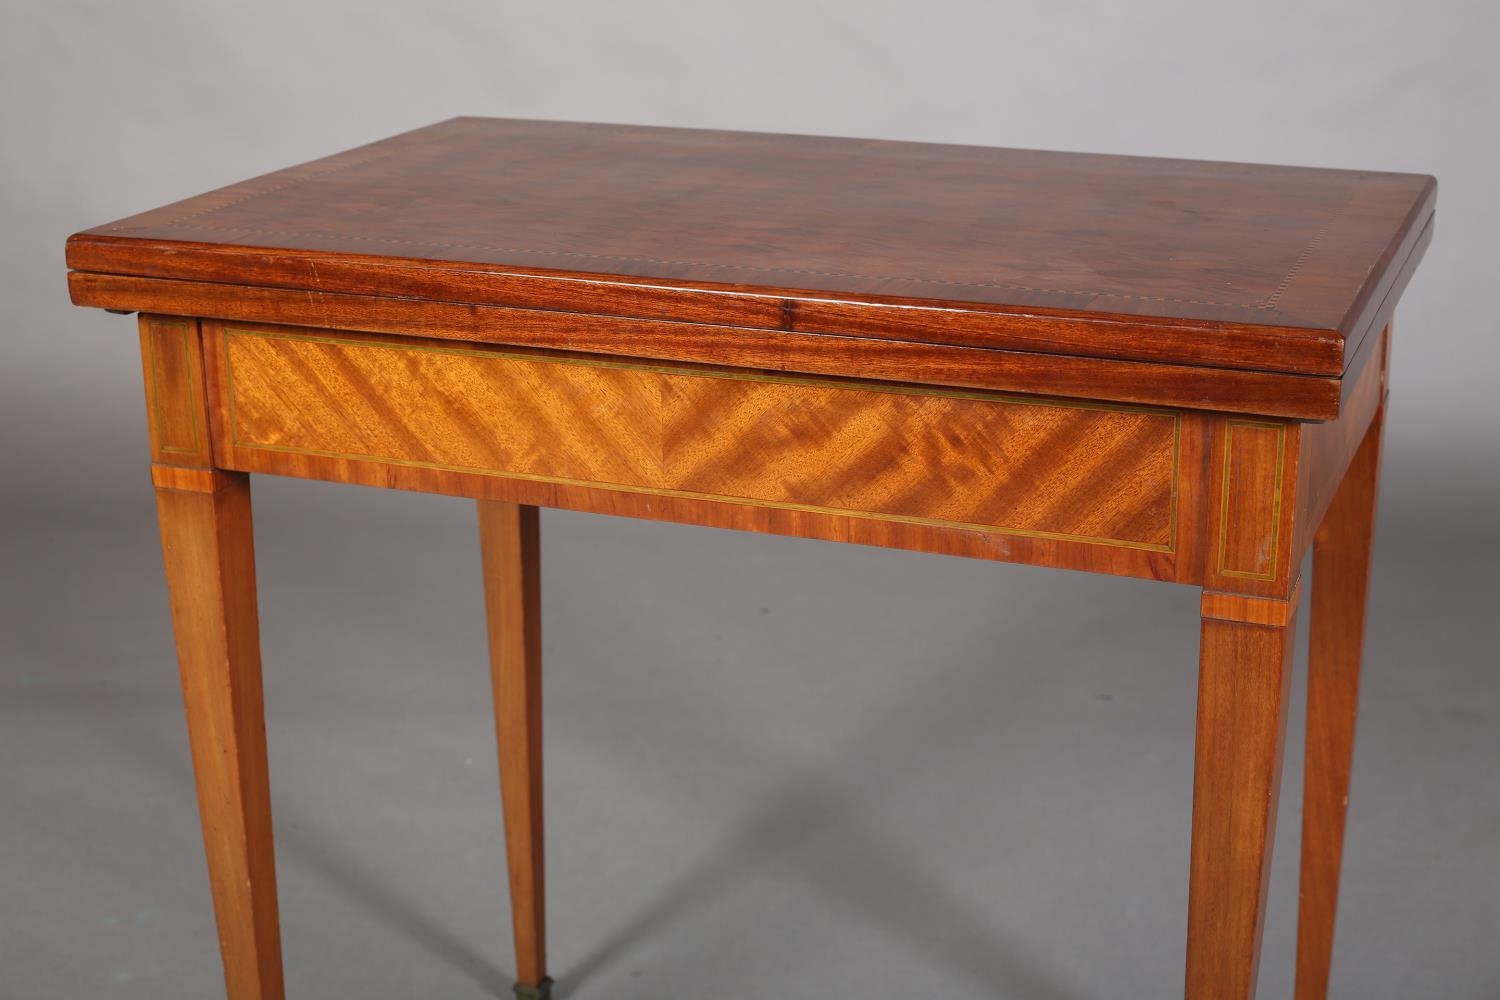 AN EARLY 20TH CENTURY MAHOGANY AND SATIN WALNUT PARQUETRY CARD, WRITING AND DRESSING TABLE inlaid - Image 2 of 10